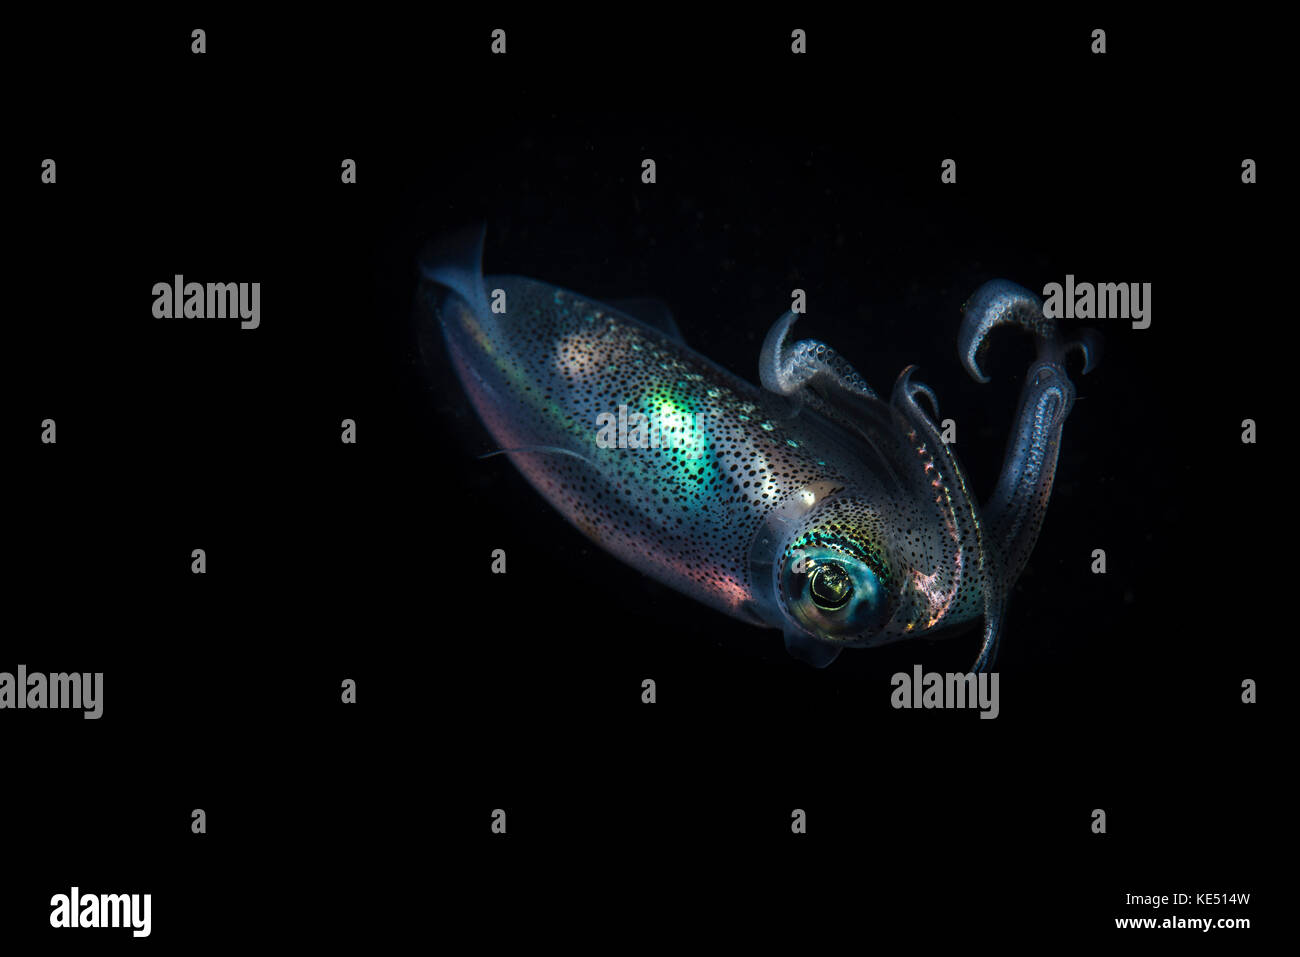 A reef squid hovers above the sandy bottom of the ocean. Stock Photo